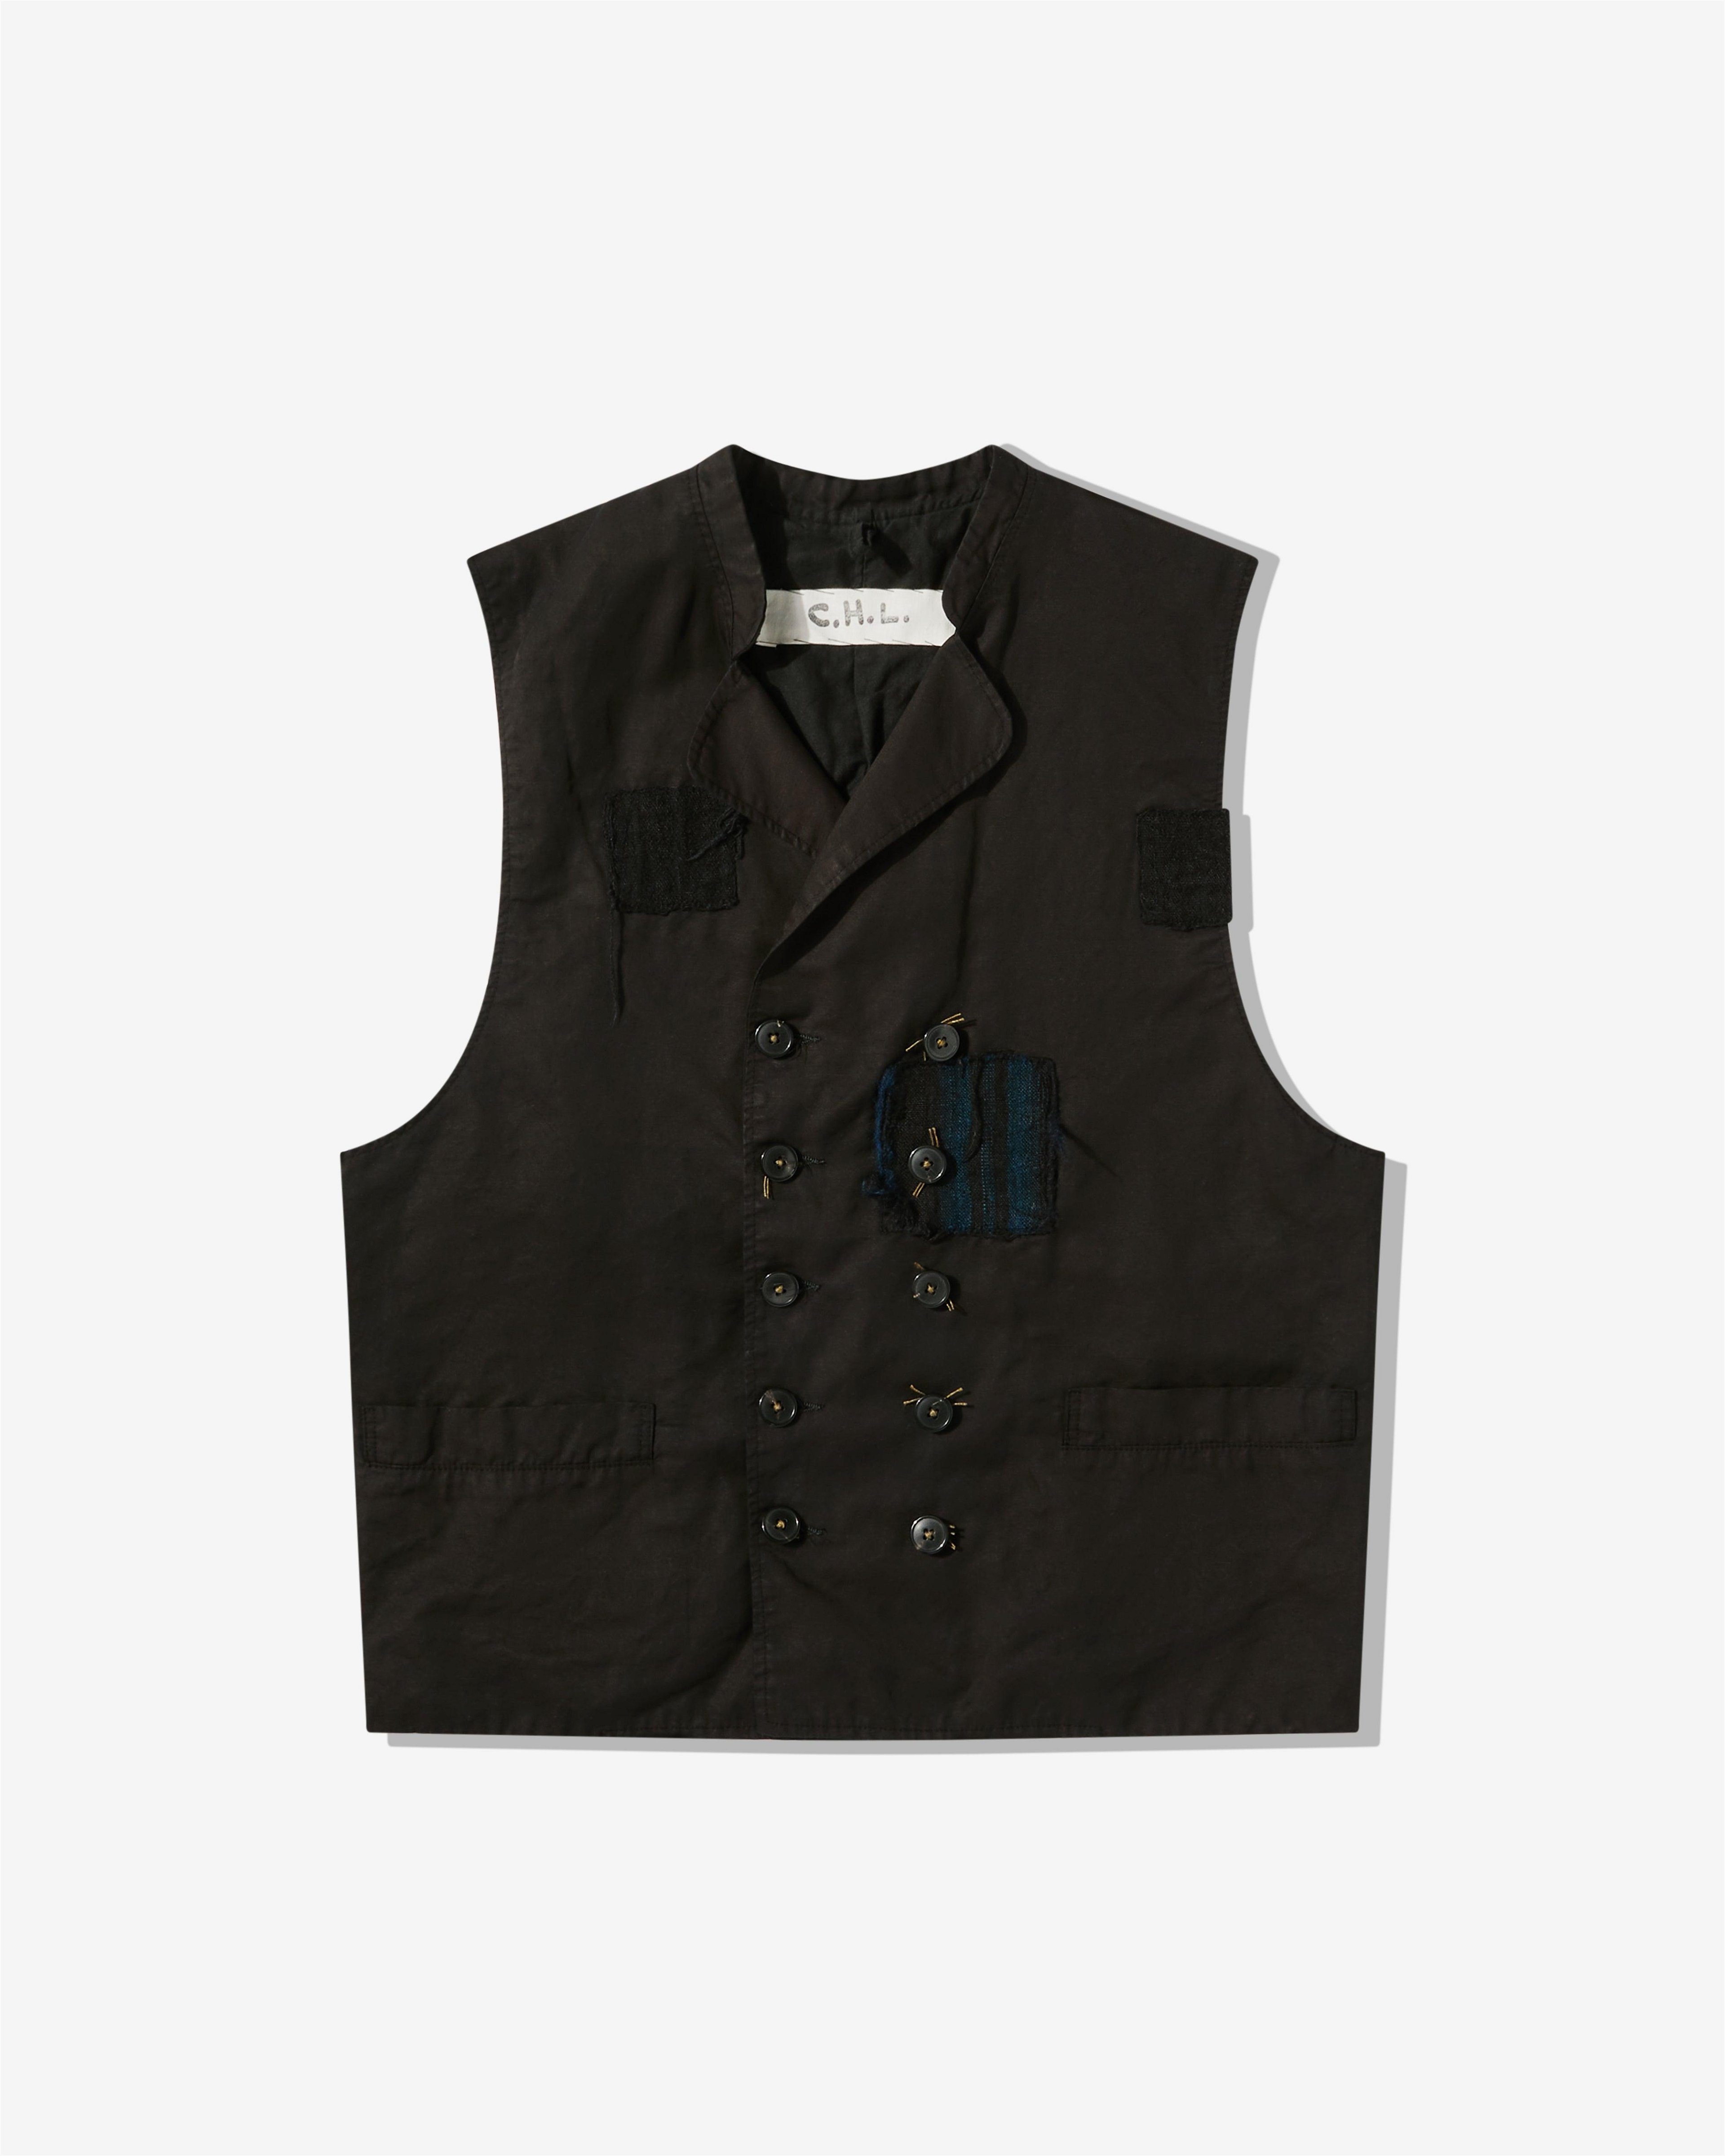 Canal House Line - Men's Dutch Worker Vest - (Black) by CANAL HOUSE LINE